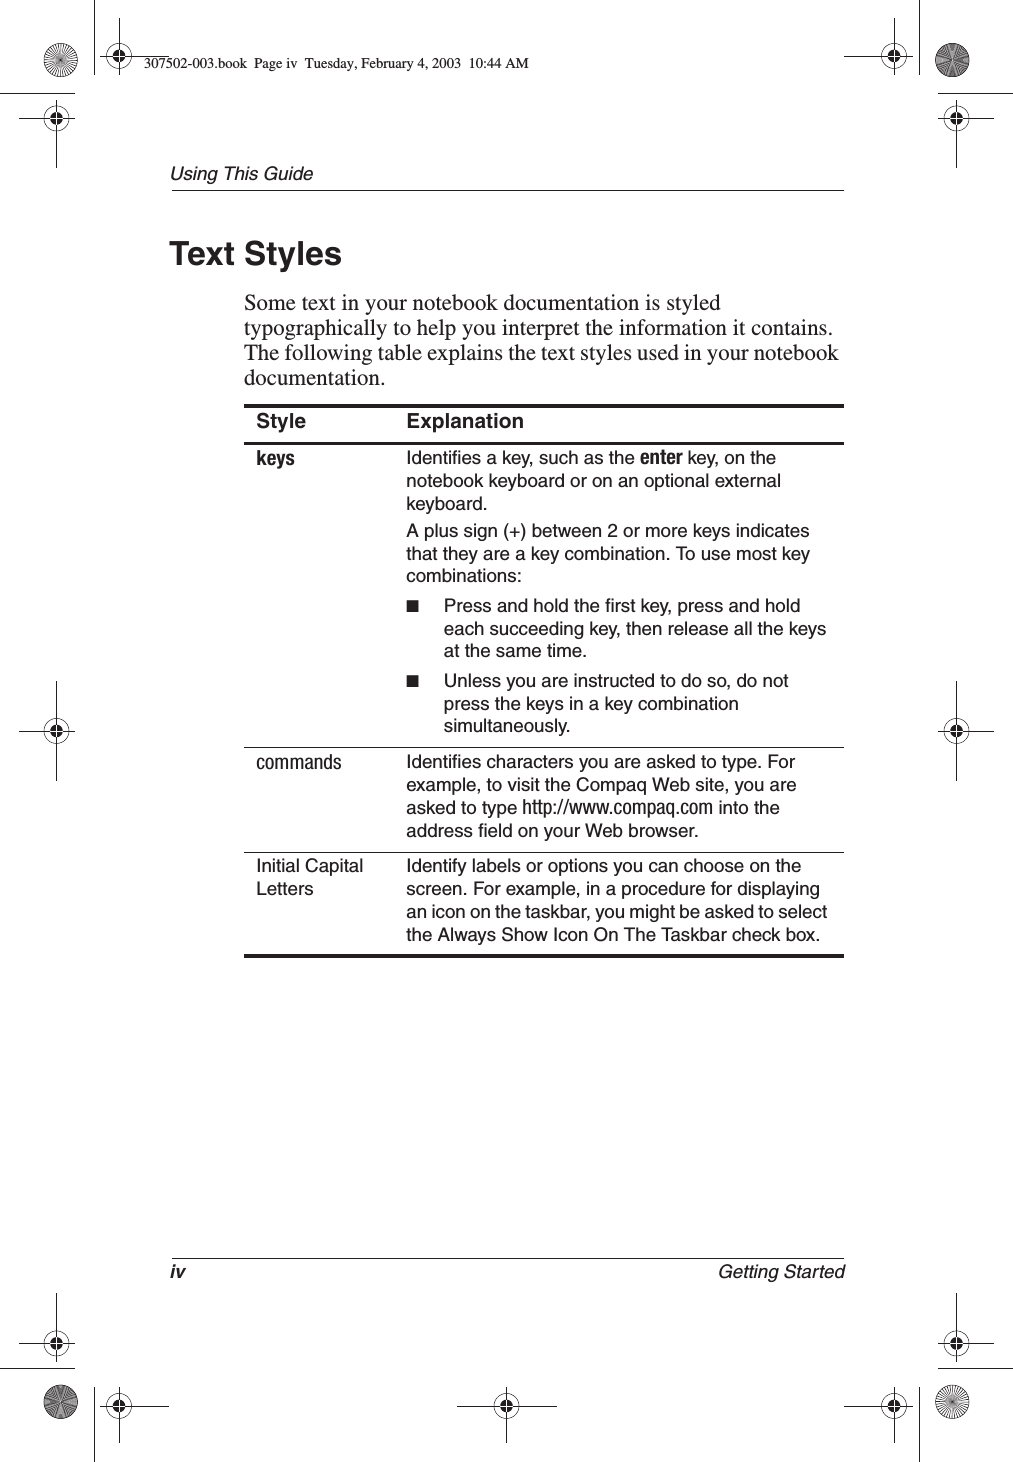 iv Getting StartedUsing This GuideText StylesSome text in your notebook documentation is styled typographically to help you interpret the information it contains. The following table explains the text styles used in your notebook documentation.Style Explanationkeys Identifies a key, such as the enter key, on the notebook keyboard or on an optional external keyboard.A plus sign (+) between 2 or more keys indicates that they are a key combination. To use most key combinations:■Press and hold the first key, press and hold each succeeding key, then release all the keys at the same time. ■Unless you are instructed to do so, do not press the keys in a key combination simultaneously.commands Identifies characters you are asked to type. For example, to visit the Compaq Web site, you are asked to type http://www.compaq.com into the address field on your Web browser.Initial Capital LettersIdentify labels or options you can choose on the screen. For example, in a procedure for displaying an icon on the taskbar, you might be asked to select the Always Show Icon On The Taskbar check box.307502-003.book  Page iv  Tuesday, February 4, 2003  10:44 AM